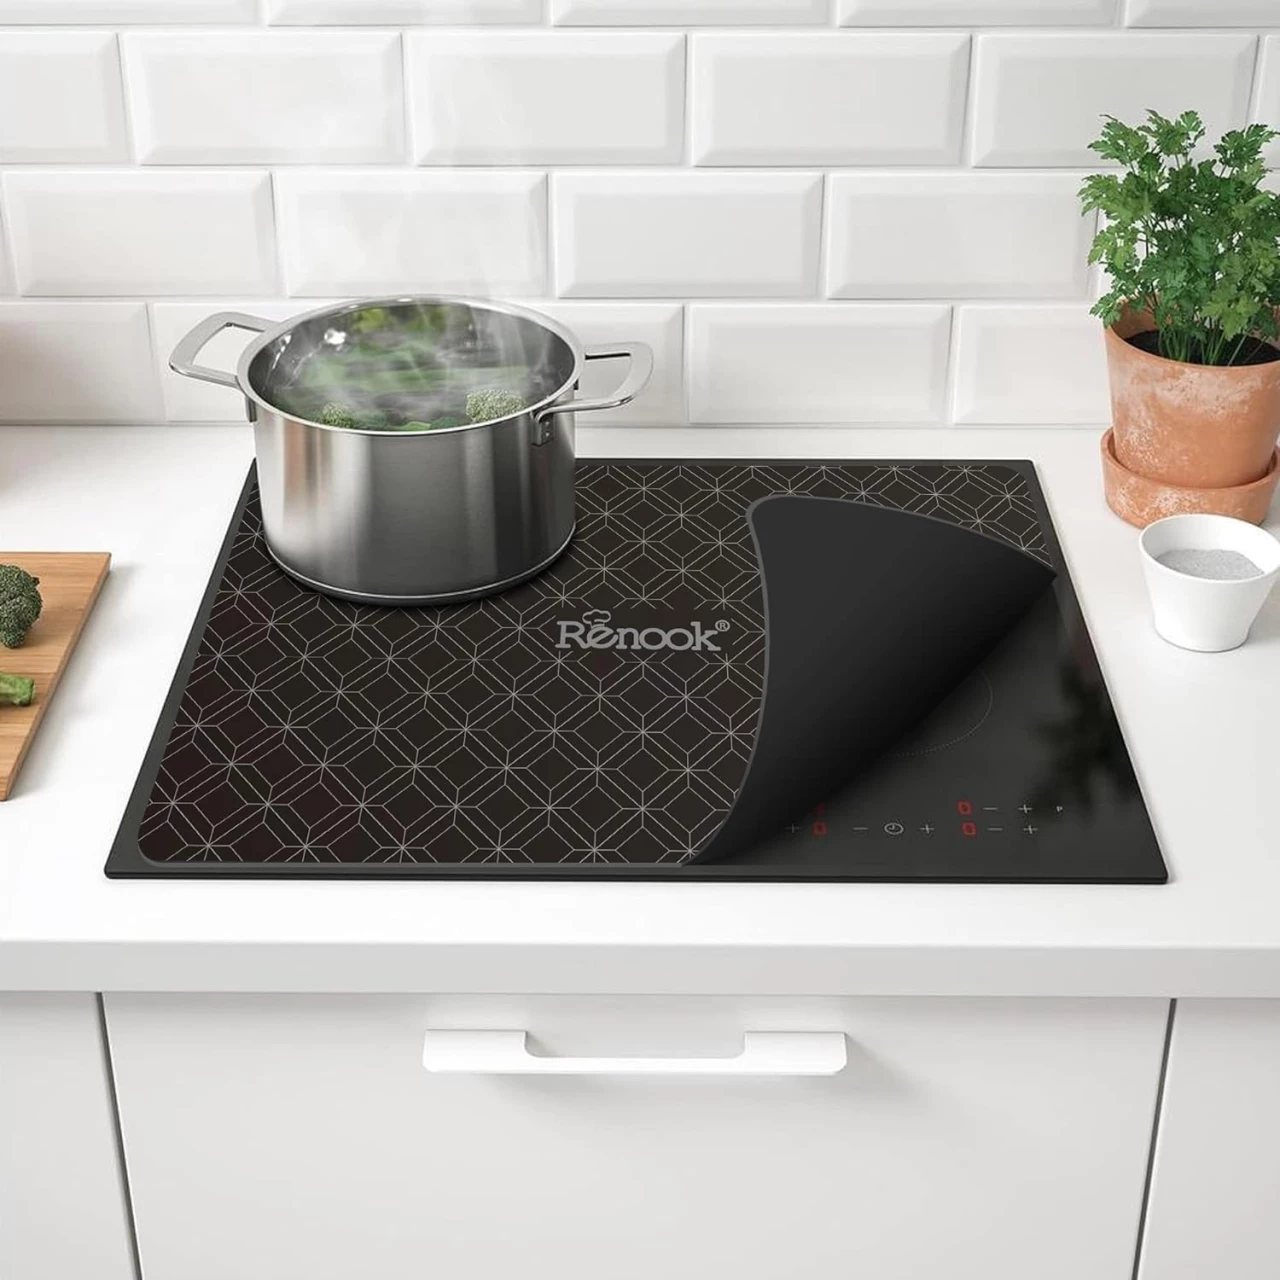 RENOOK induction cooktop protector-Food grade silicone Anti-scratch glass top induction mat, anti-slip multifunctional induction mat for cooktop-for Magnetic Stove